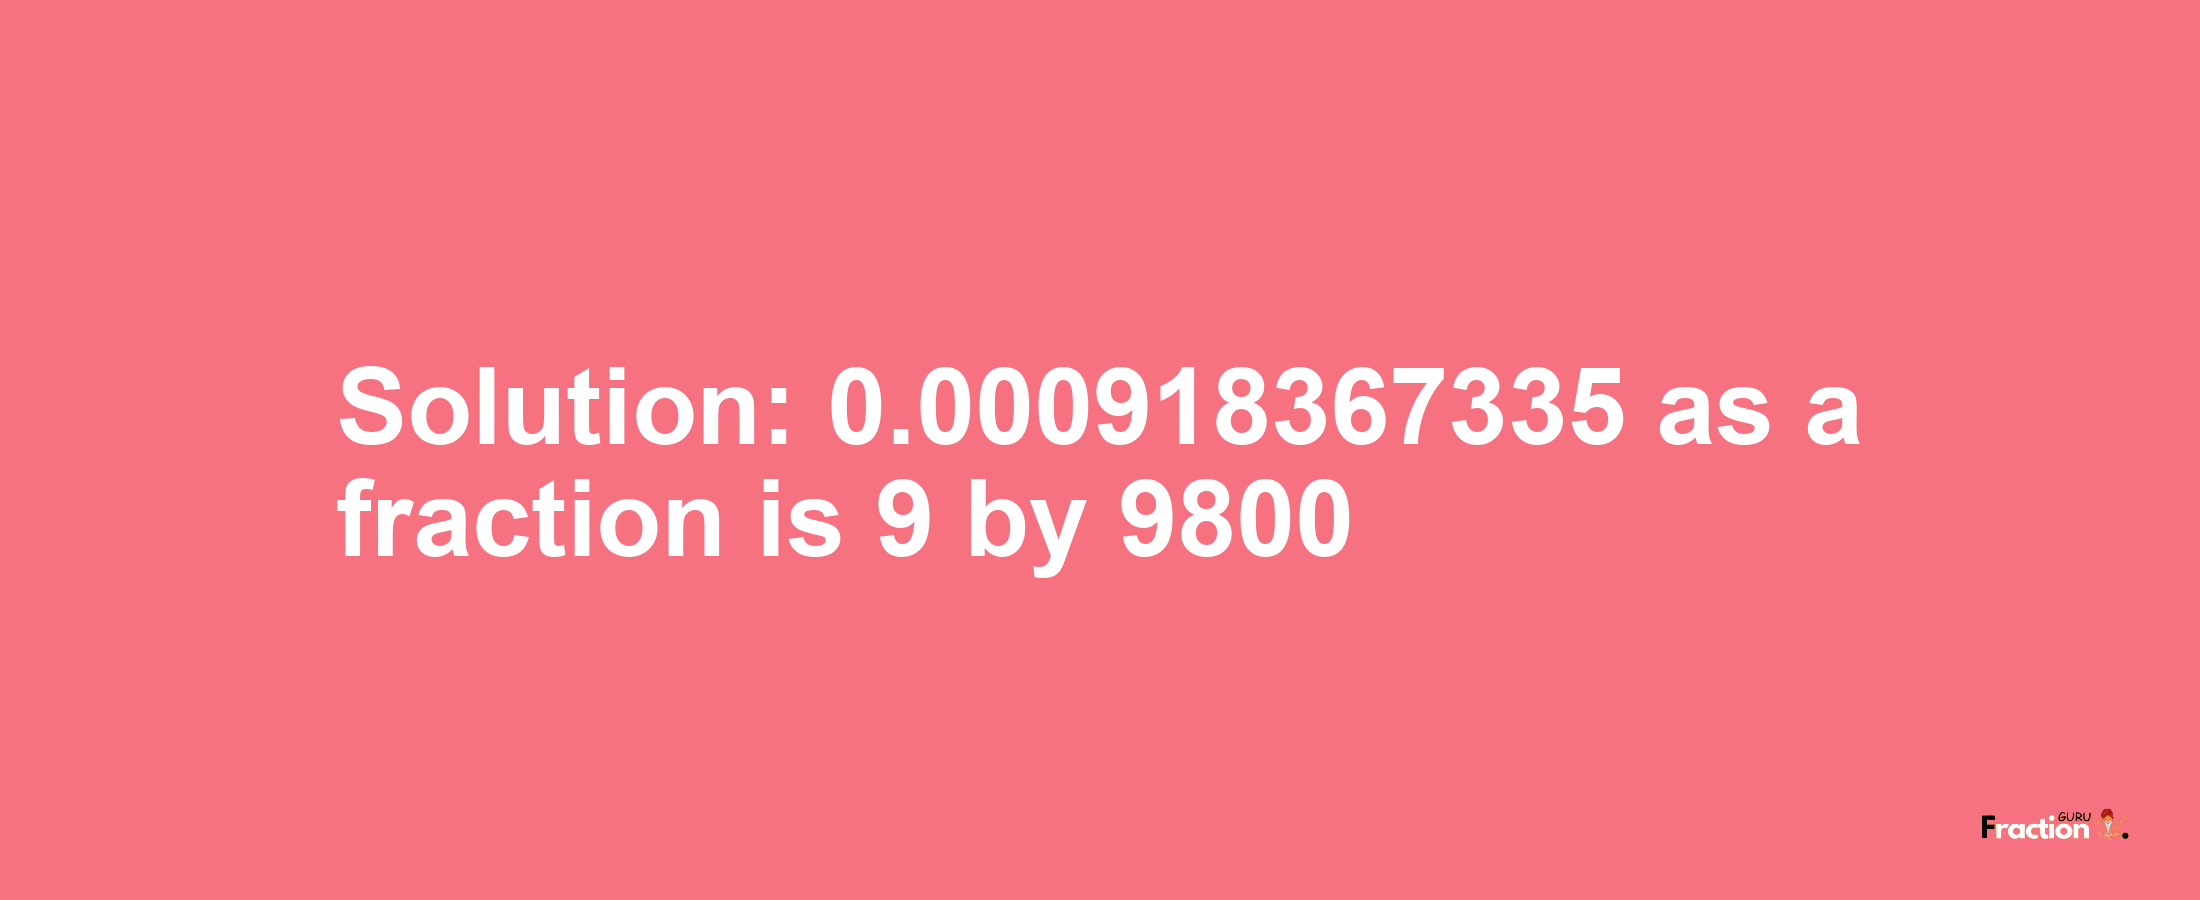 Solution:0.000918367335 as a fraction is 9/9800